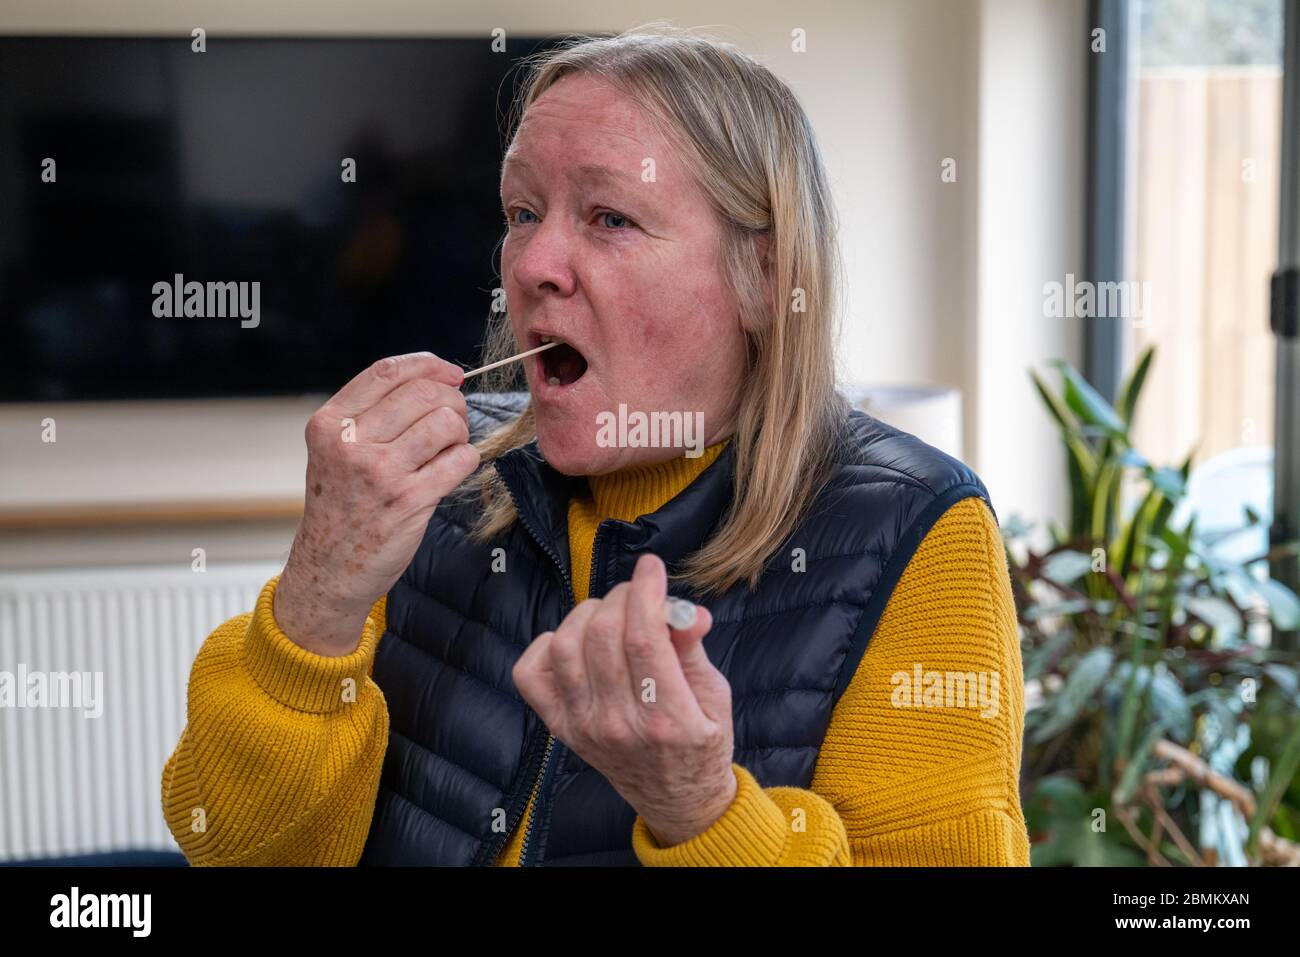 An essential worker using a Coronavirus test kit at home by placing the swab into her mouth and gagging from the taste. Stock Photo